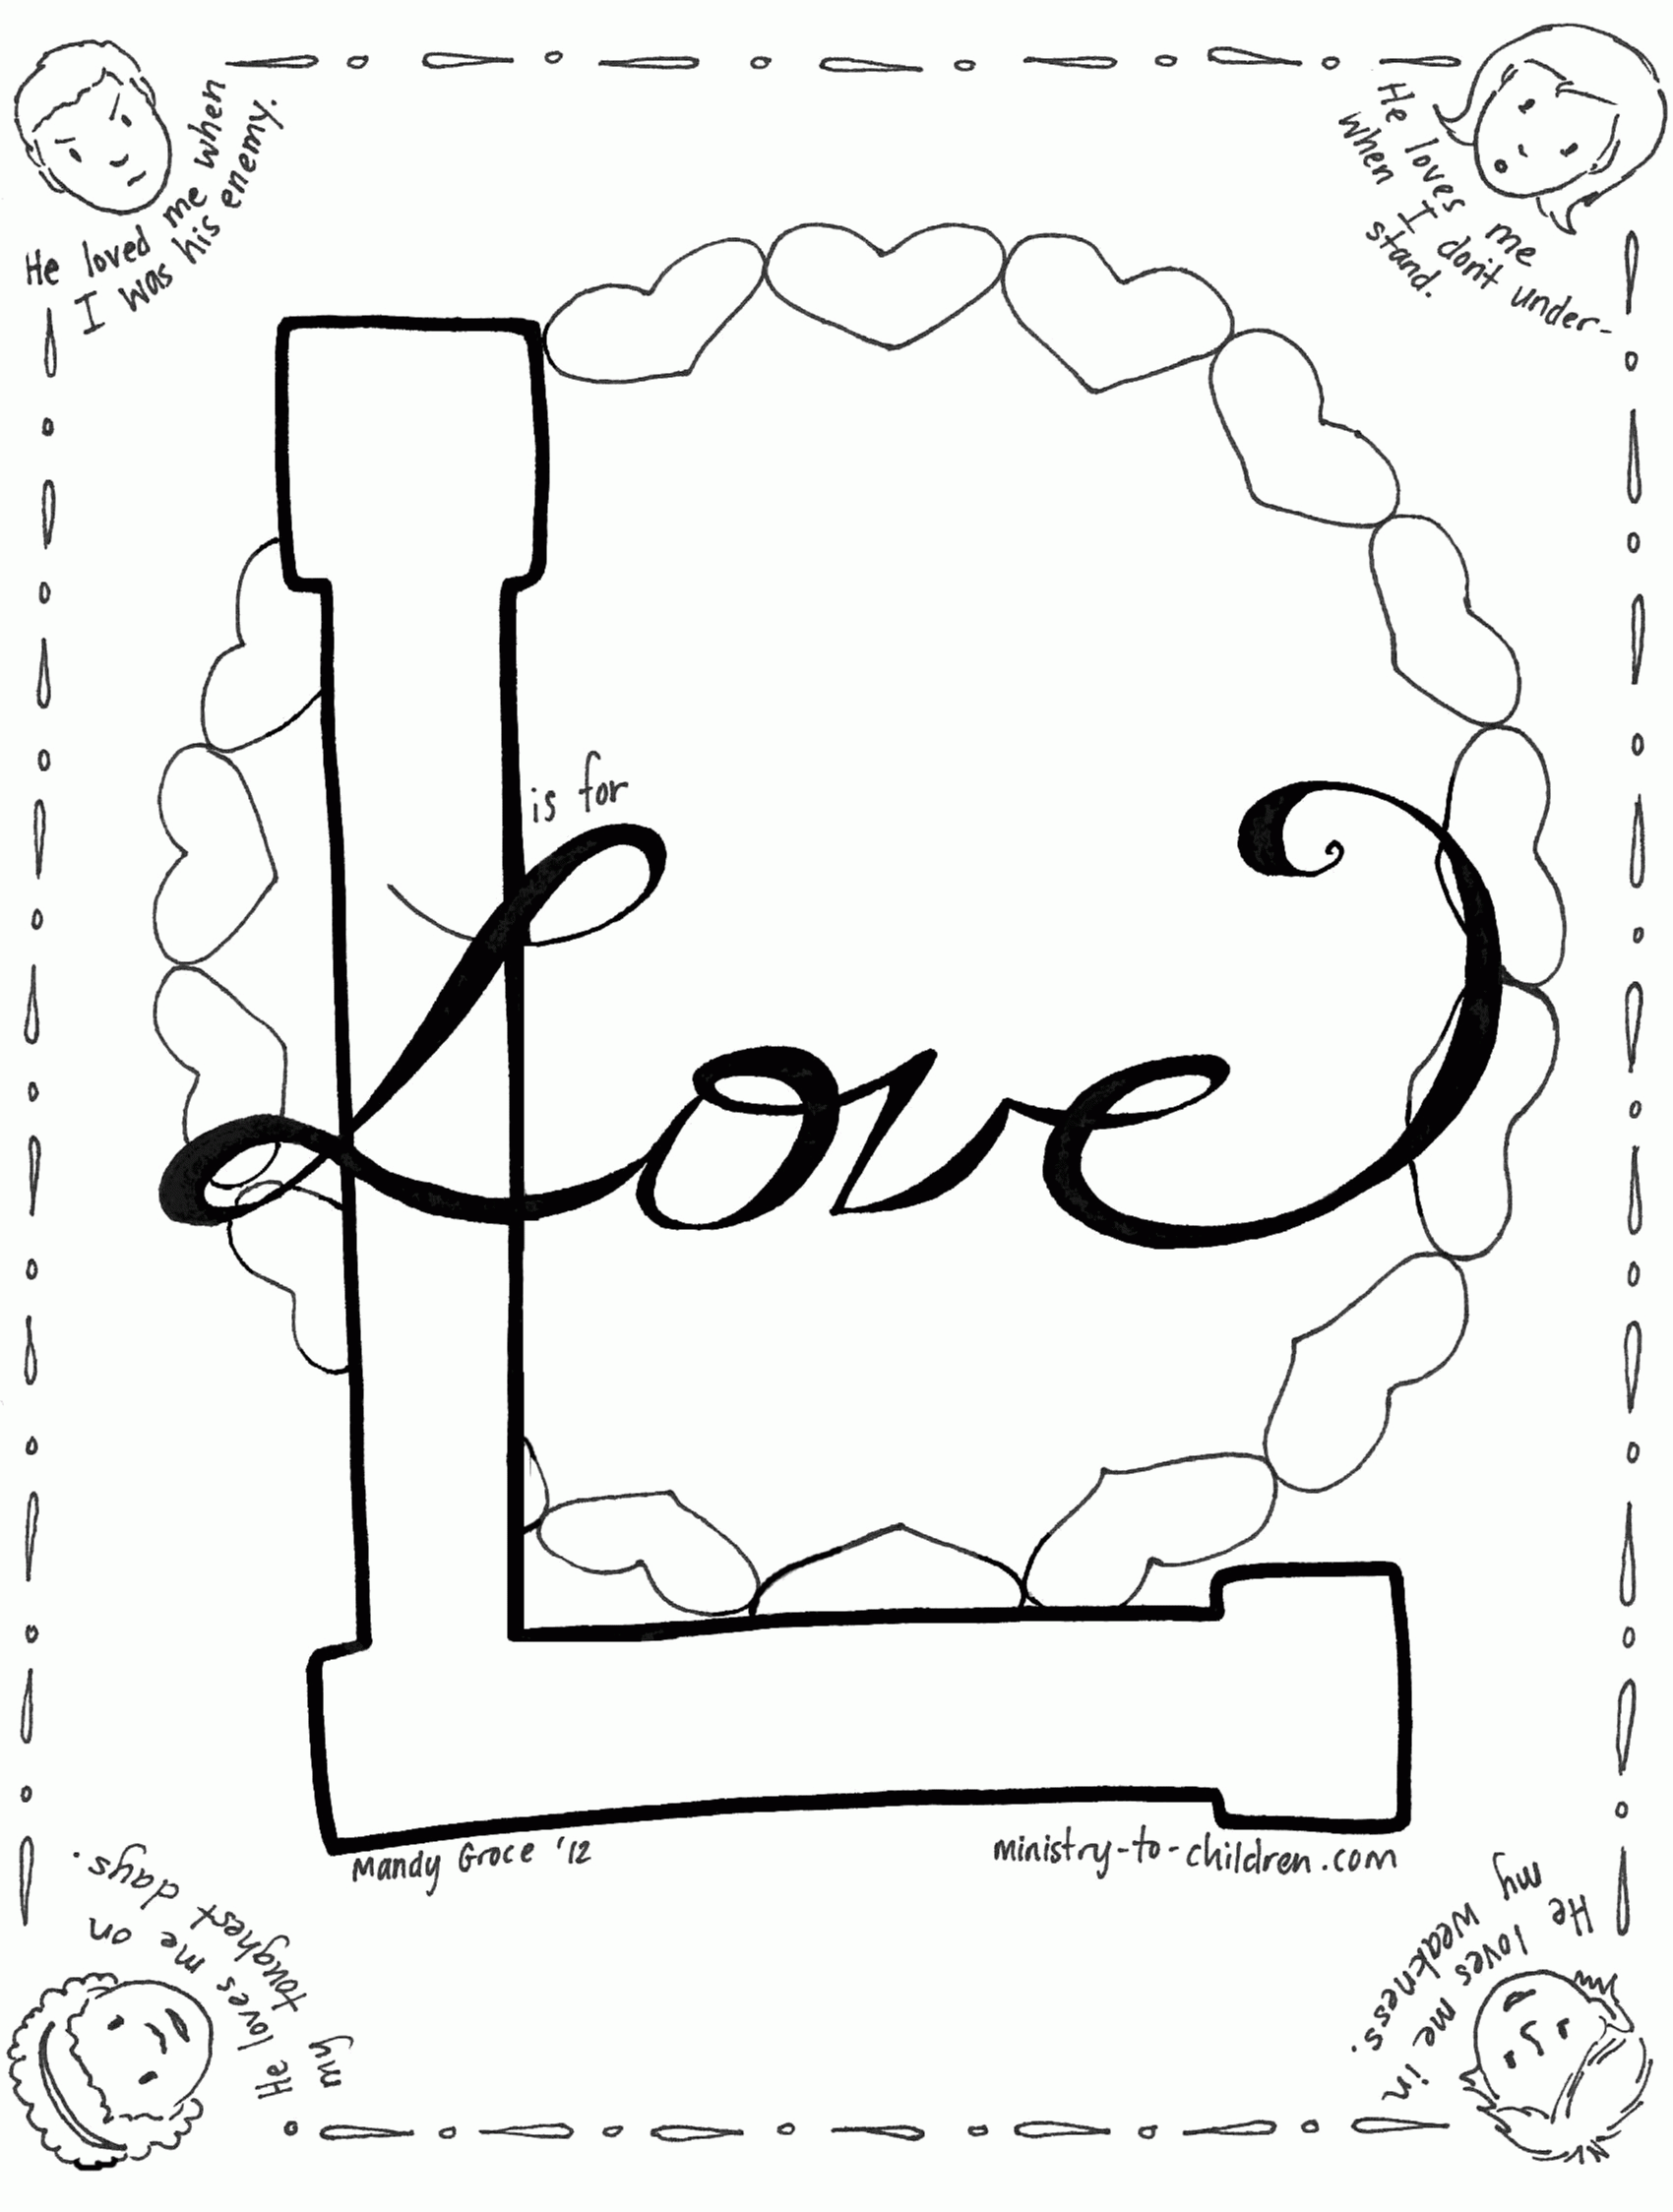 About True Love Coloring Pages - Coloring Pages For All Ages